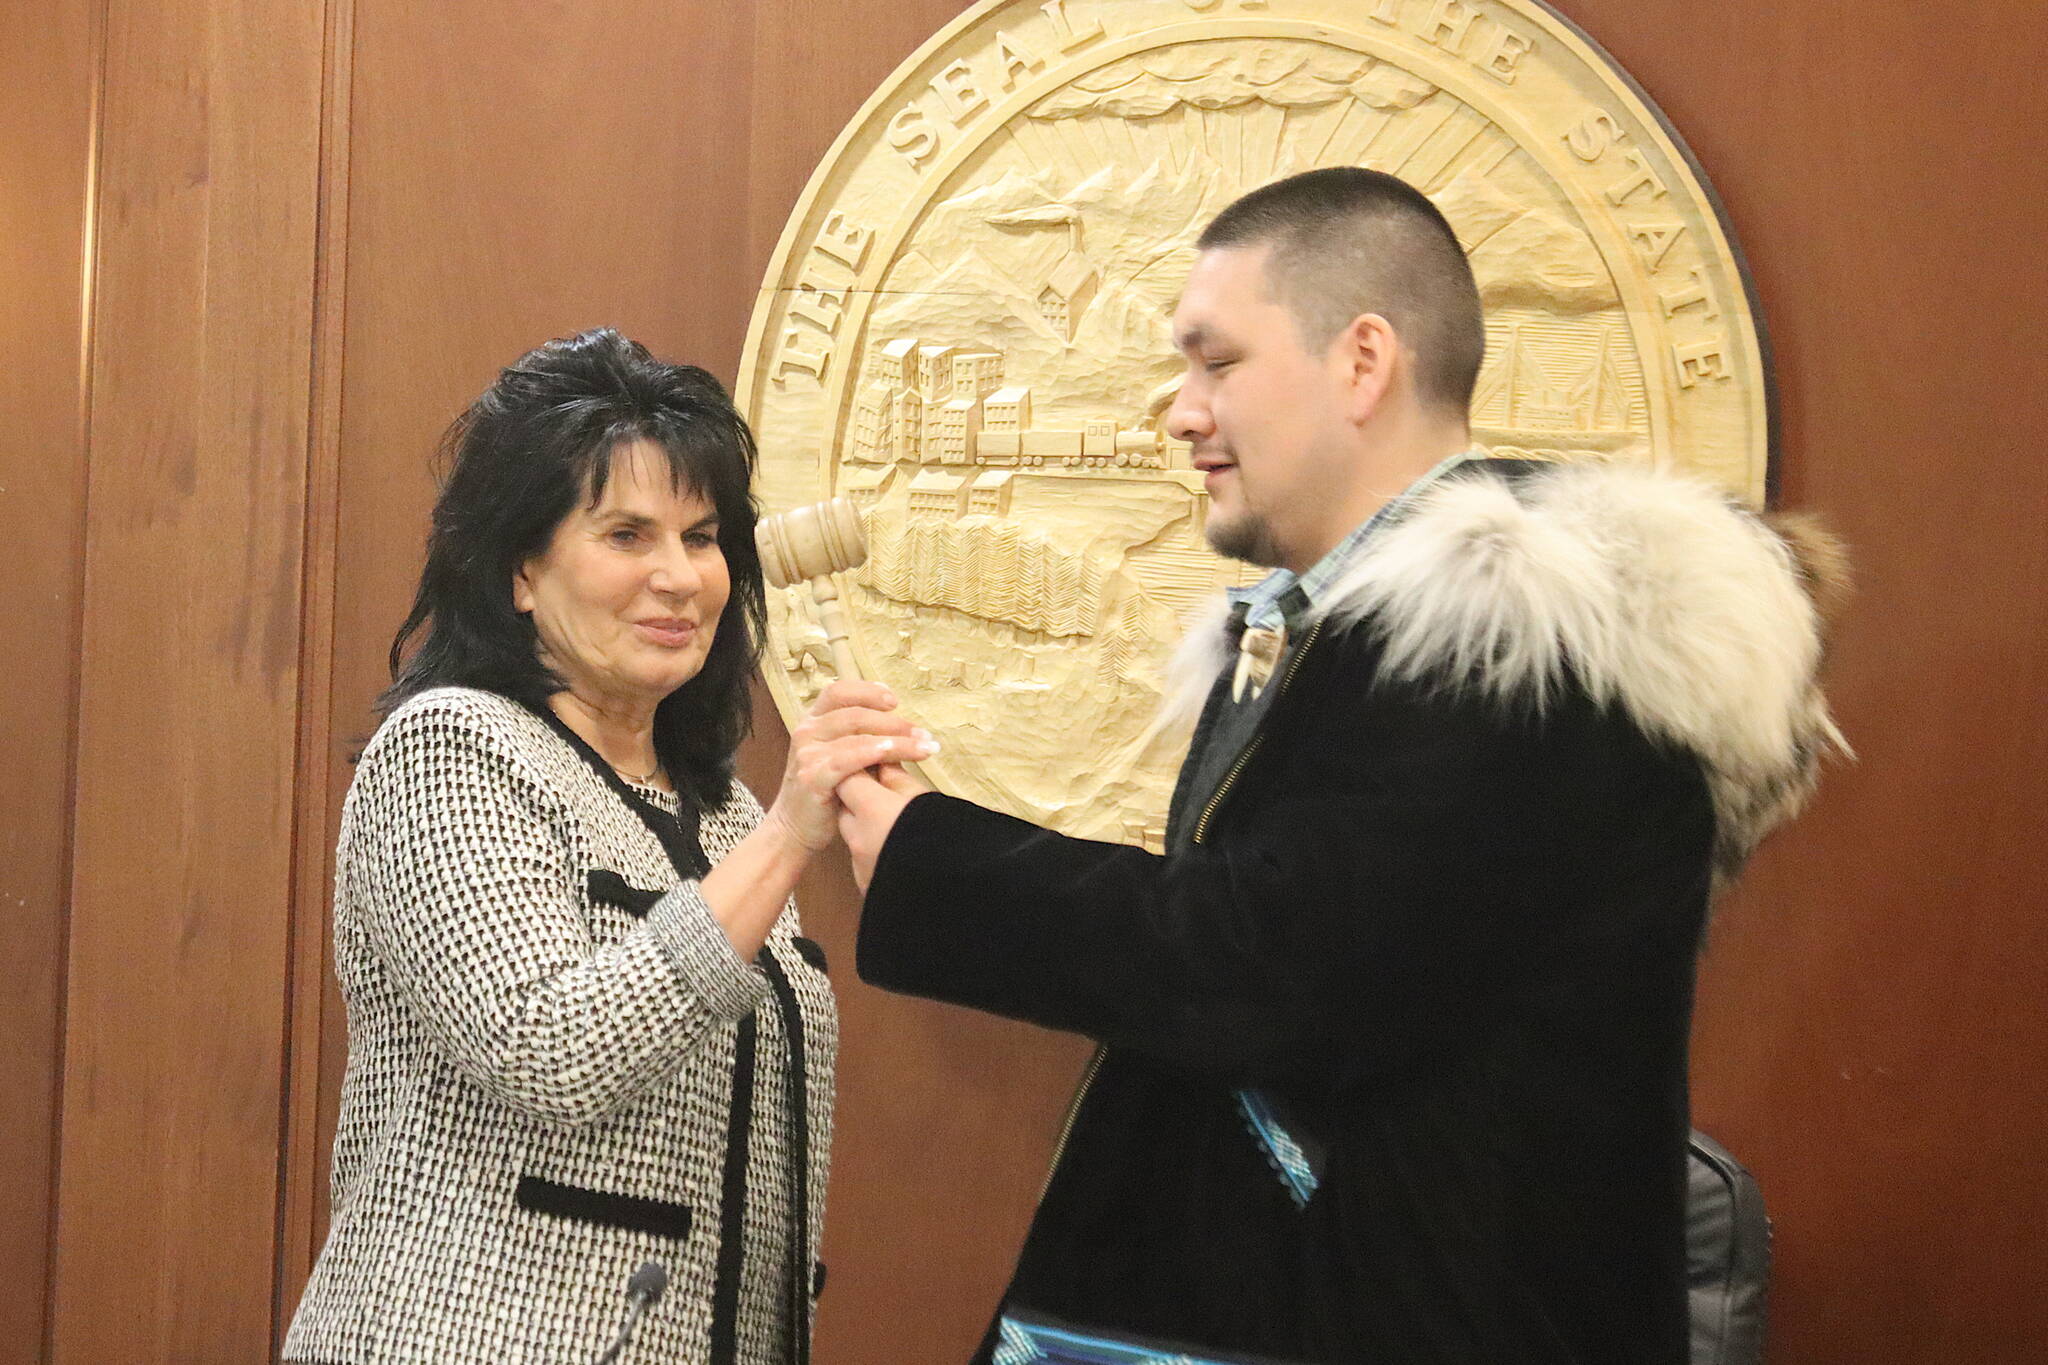 State Rep. Cathy TIlton, R-Wasilla, takes to gavel from State Rep. Josiah Patkotak, I-Utqiaġvik, after she is elected speaker of the Alaska State House on Wednesday. She was elected by a 26-14 bipartisan vote, but the initial majority consists of 19 Republicans and four members of the Bush Caucus. (Mark Sabbatini / Juneau Empire)